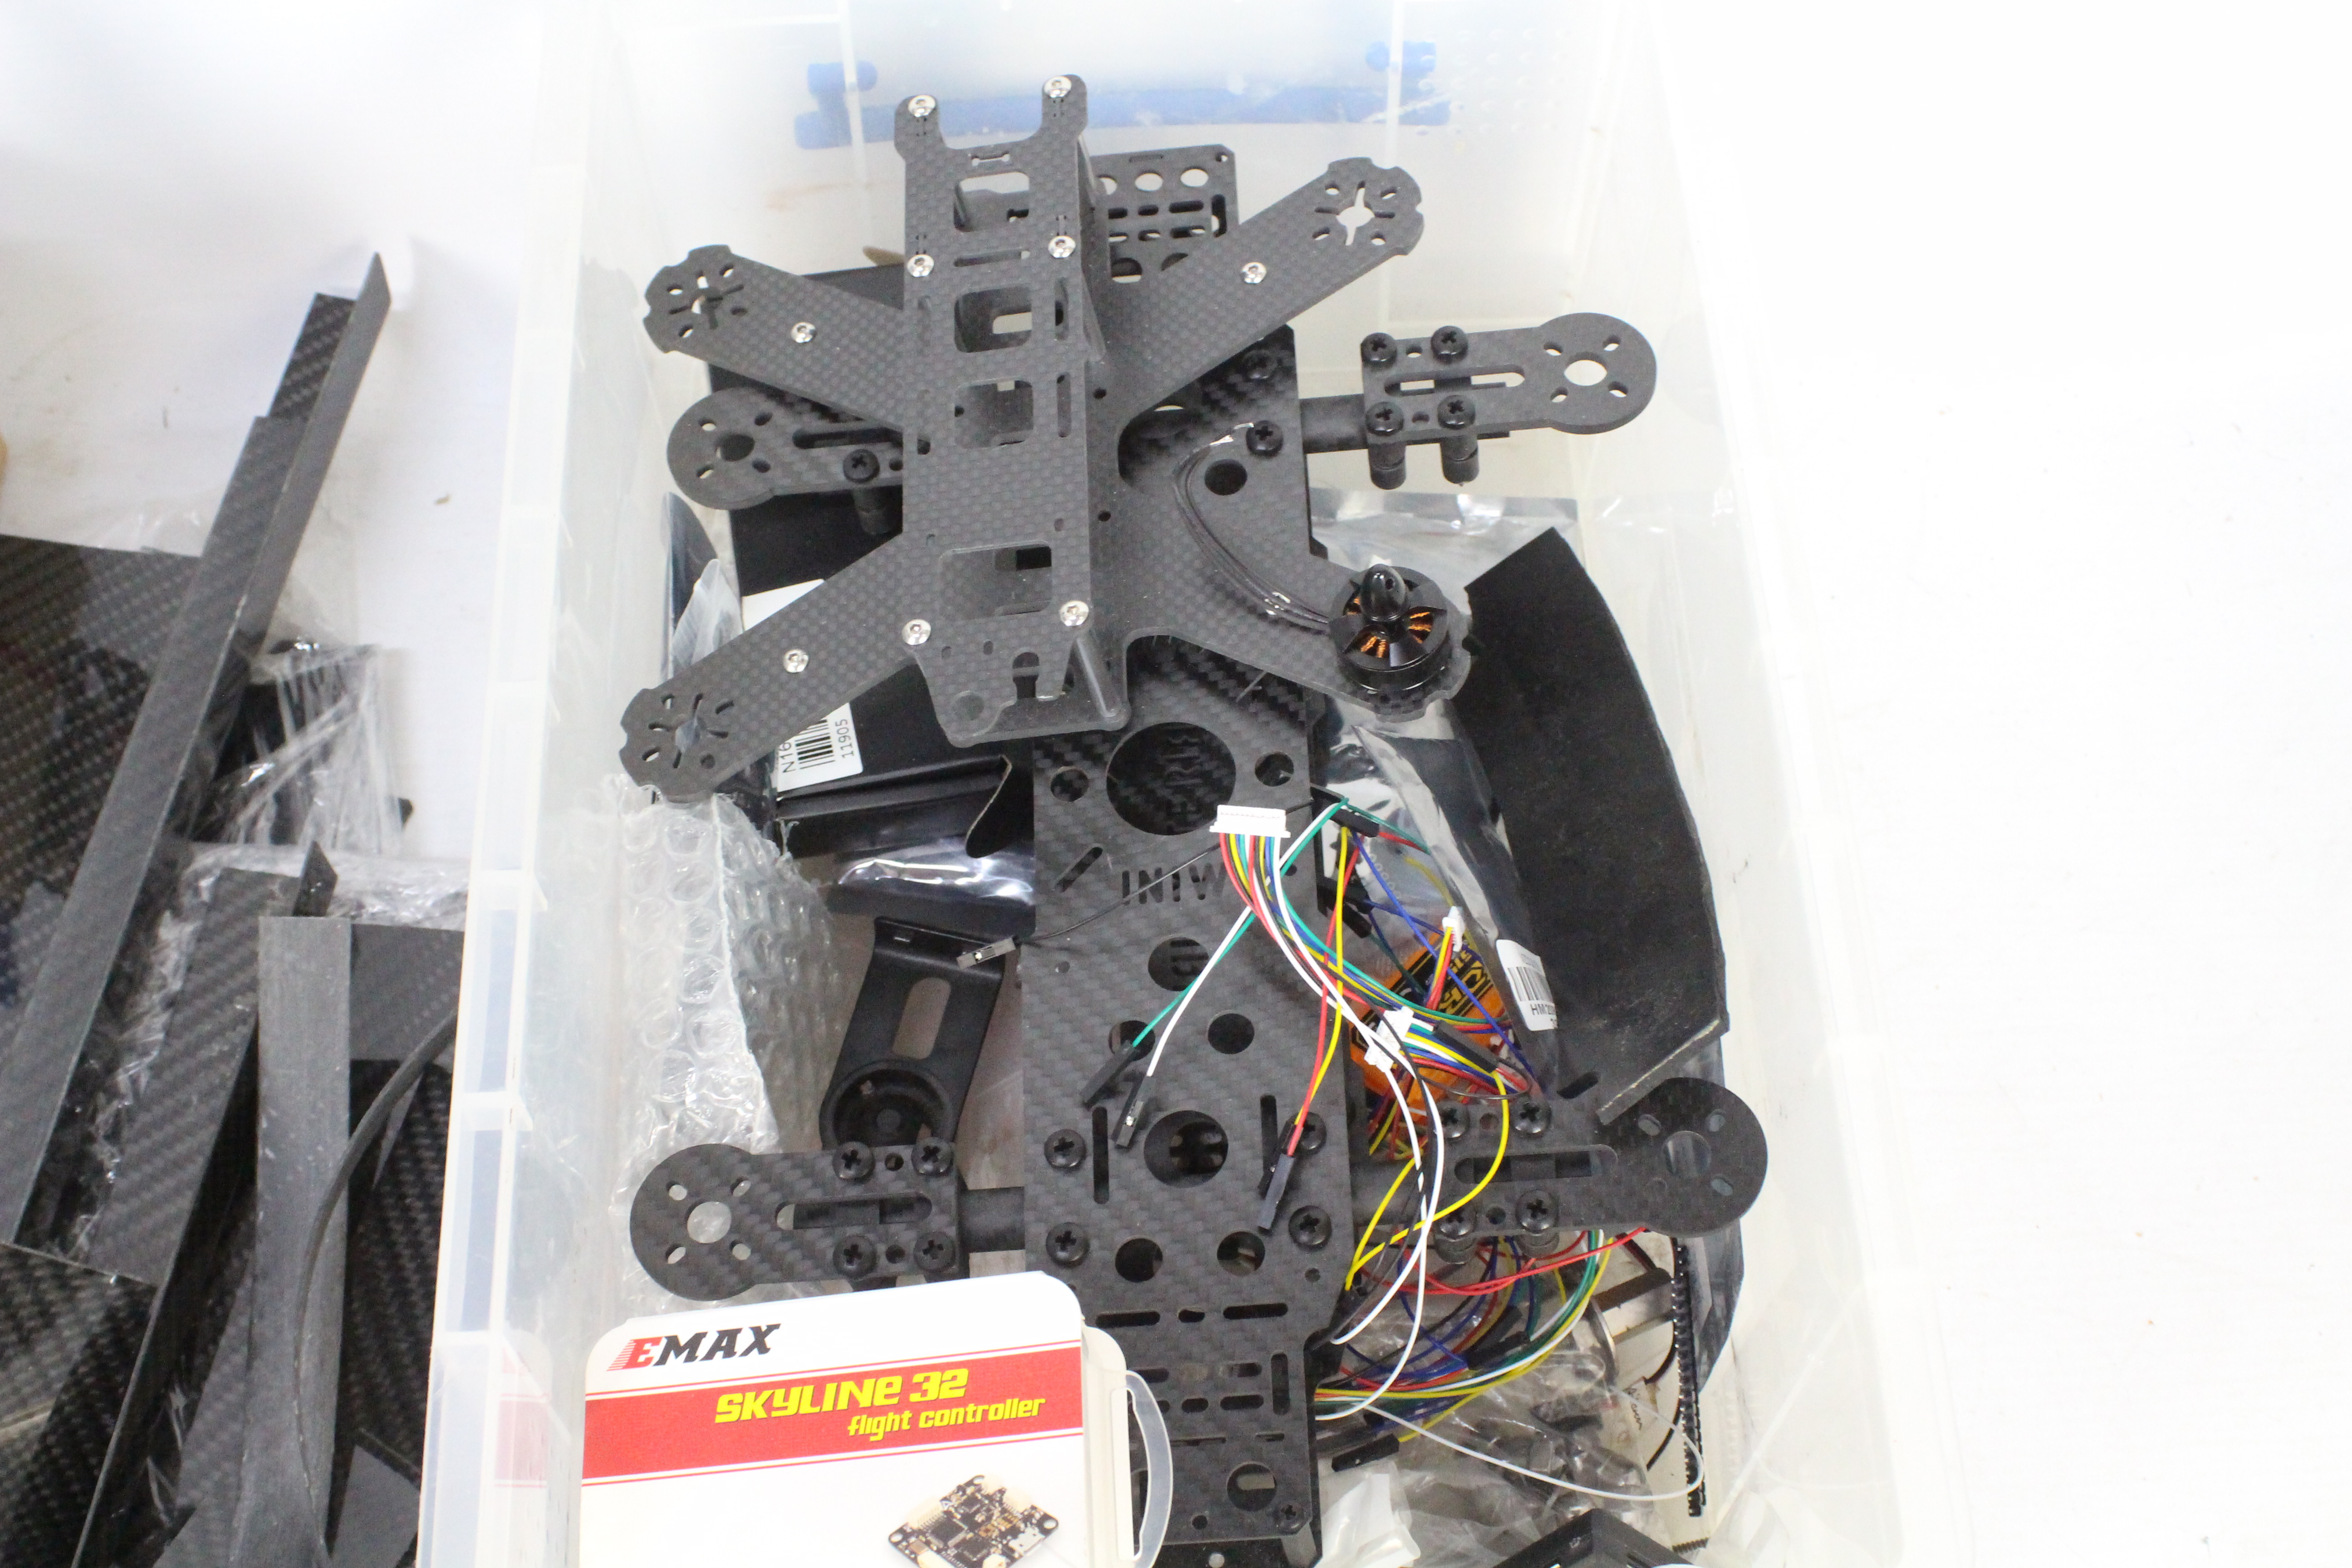 A collection of R/C spare parts and a carbon fibre quad copter frame with a box of brushless motors. - Image 4 of 5